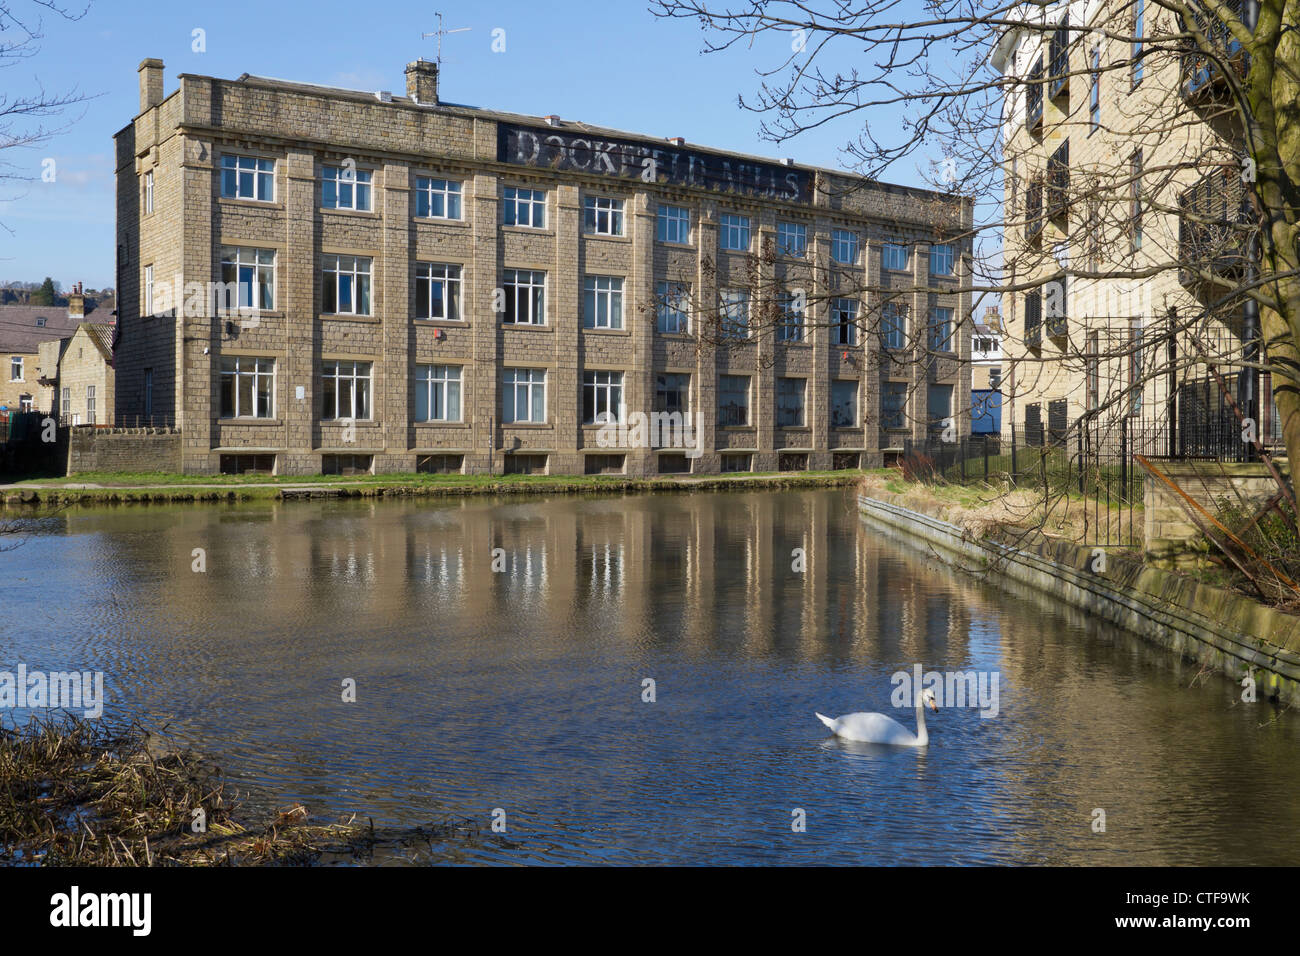 Dockfield Mills, by the Leeds Liverpool Canal at Shipley. Stock Photo